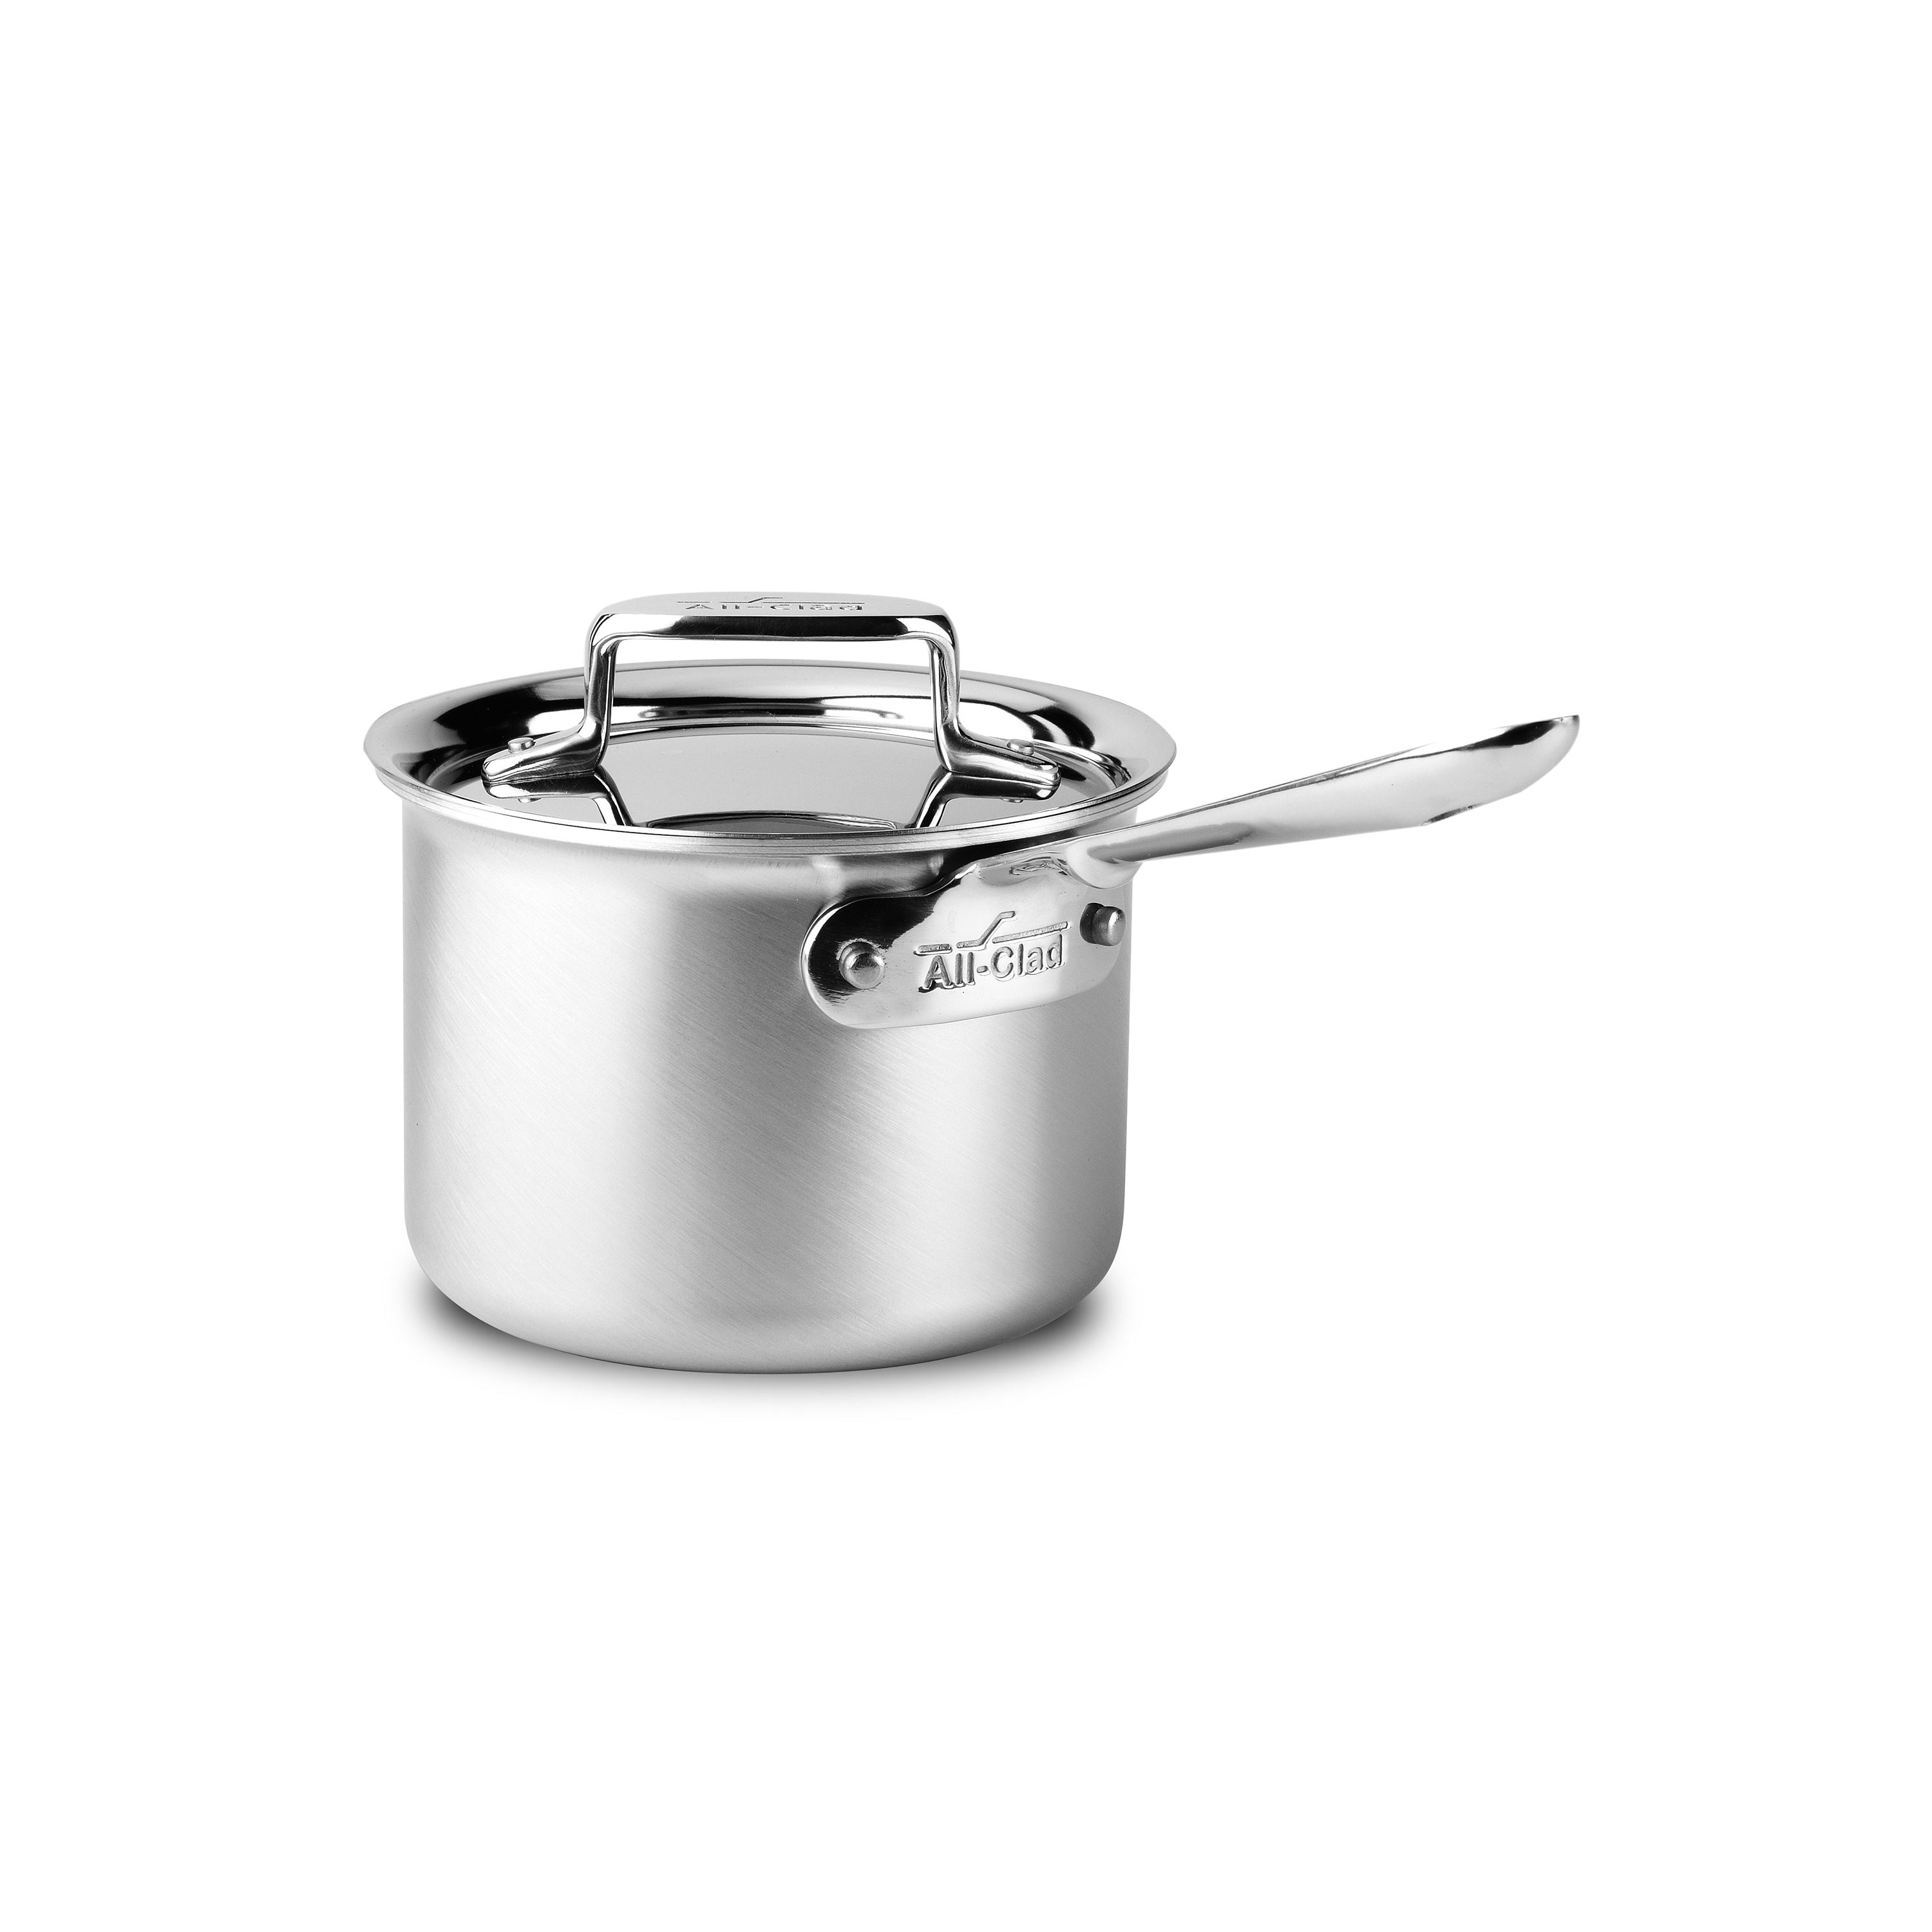 All-Clad d5 Brushed 1.5 Qt. Sauce Pan With LidSKU#:8048436 